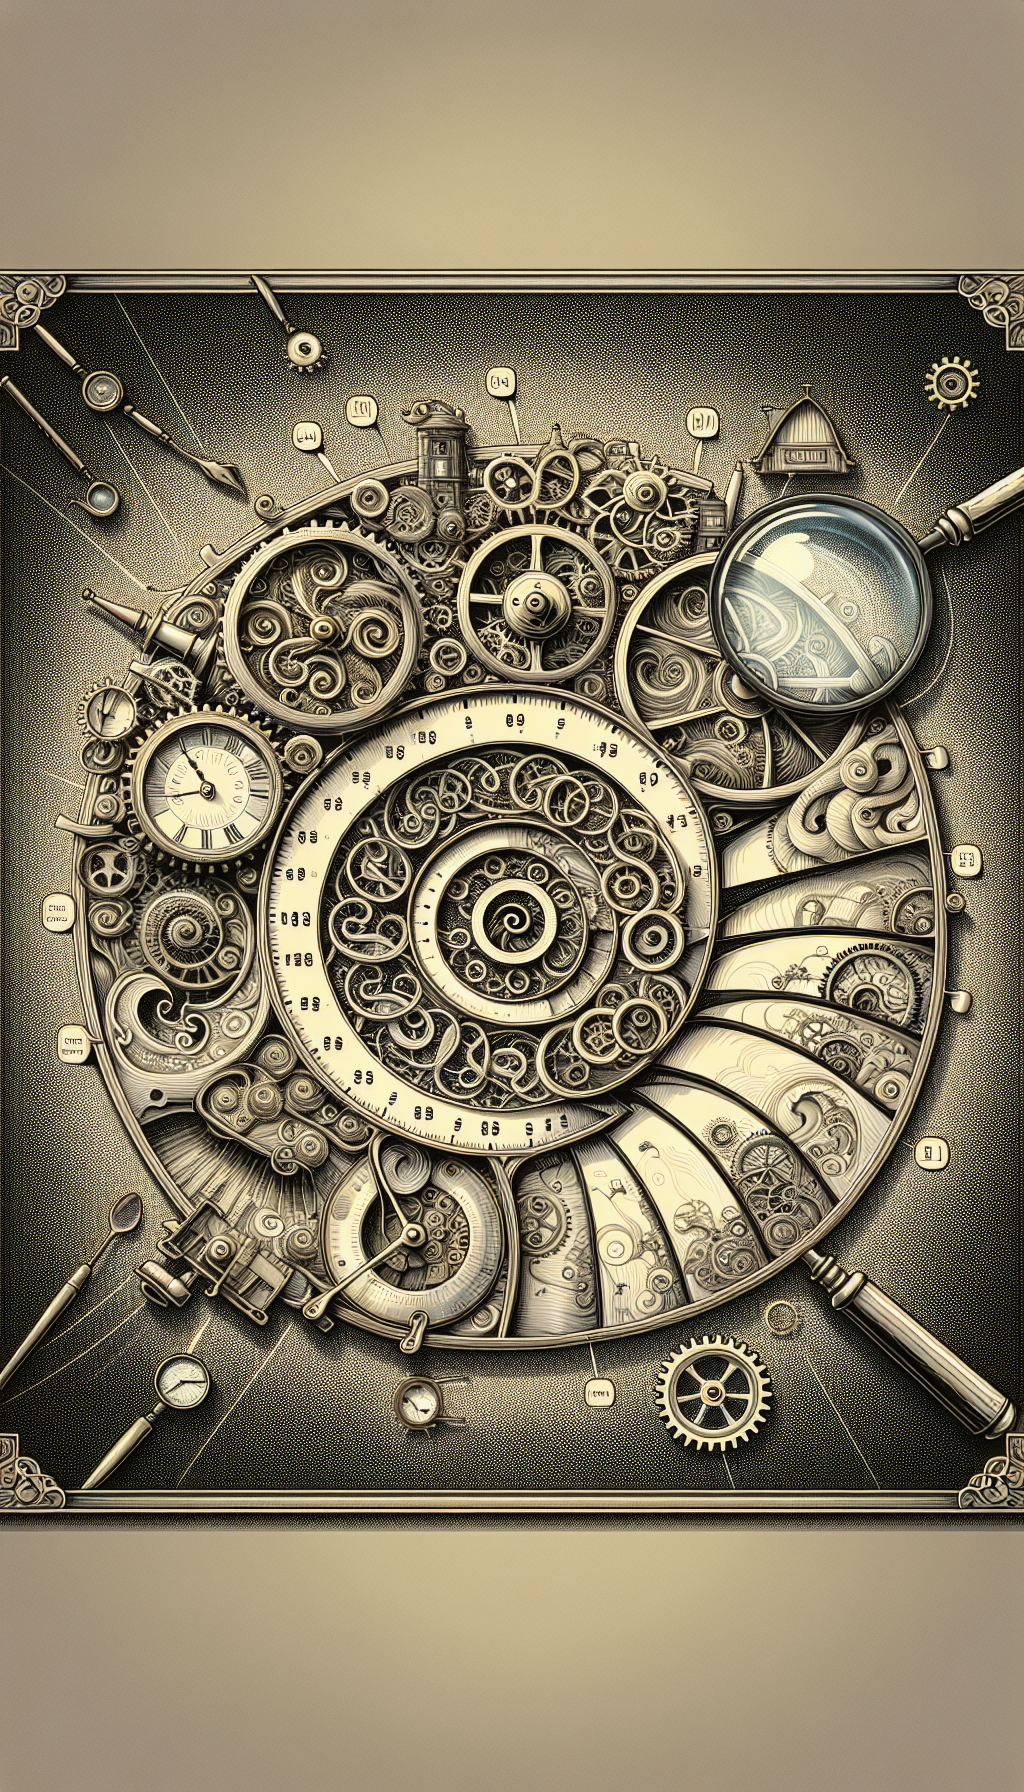 A whimsical, steampunk-inspired mantel clock unfolds its gears to reveal a spiraling timeline within. Each gear, intricately etched with distinct period motifs, symbolizes a different era in clockmaking. Hovering magnifying glasses spotlight rare antique features, as diverse artistic styles—ranging from baroque to art deco—intertwine to guide the eye through the history of mantel clock identification.